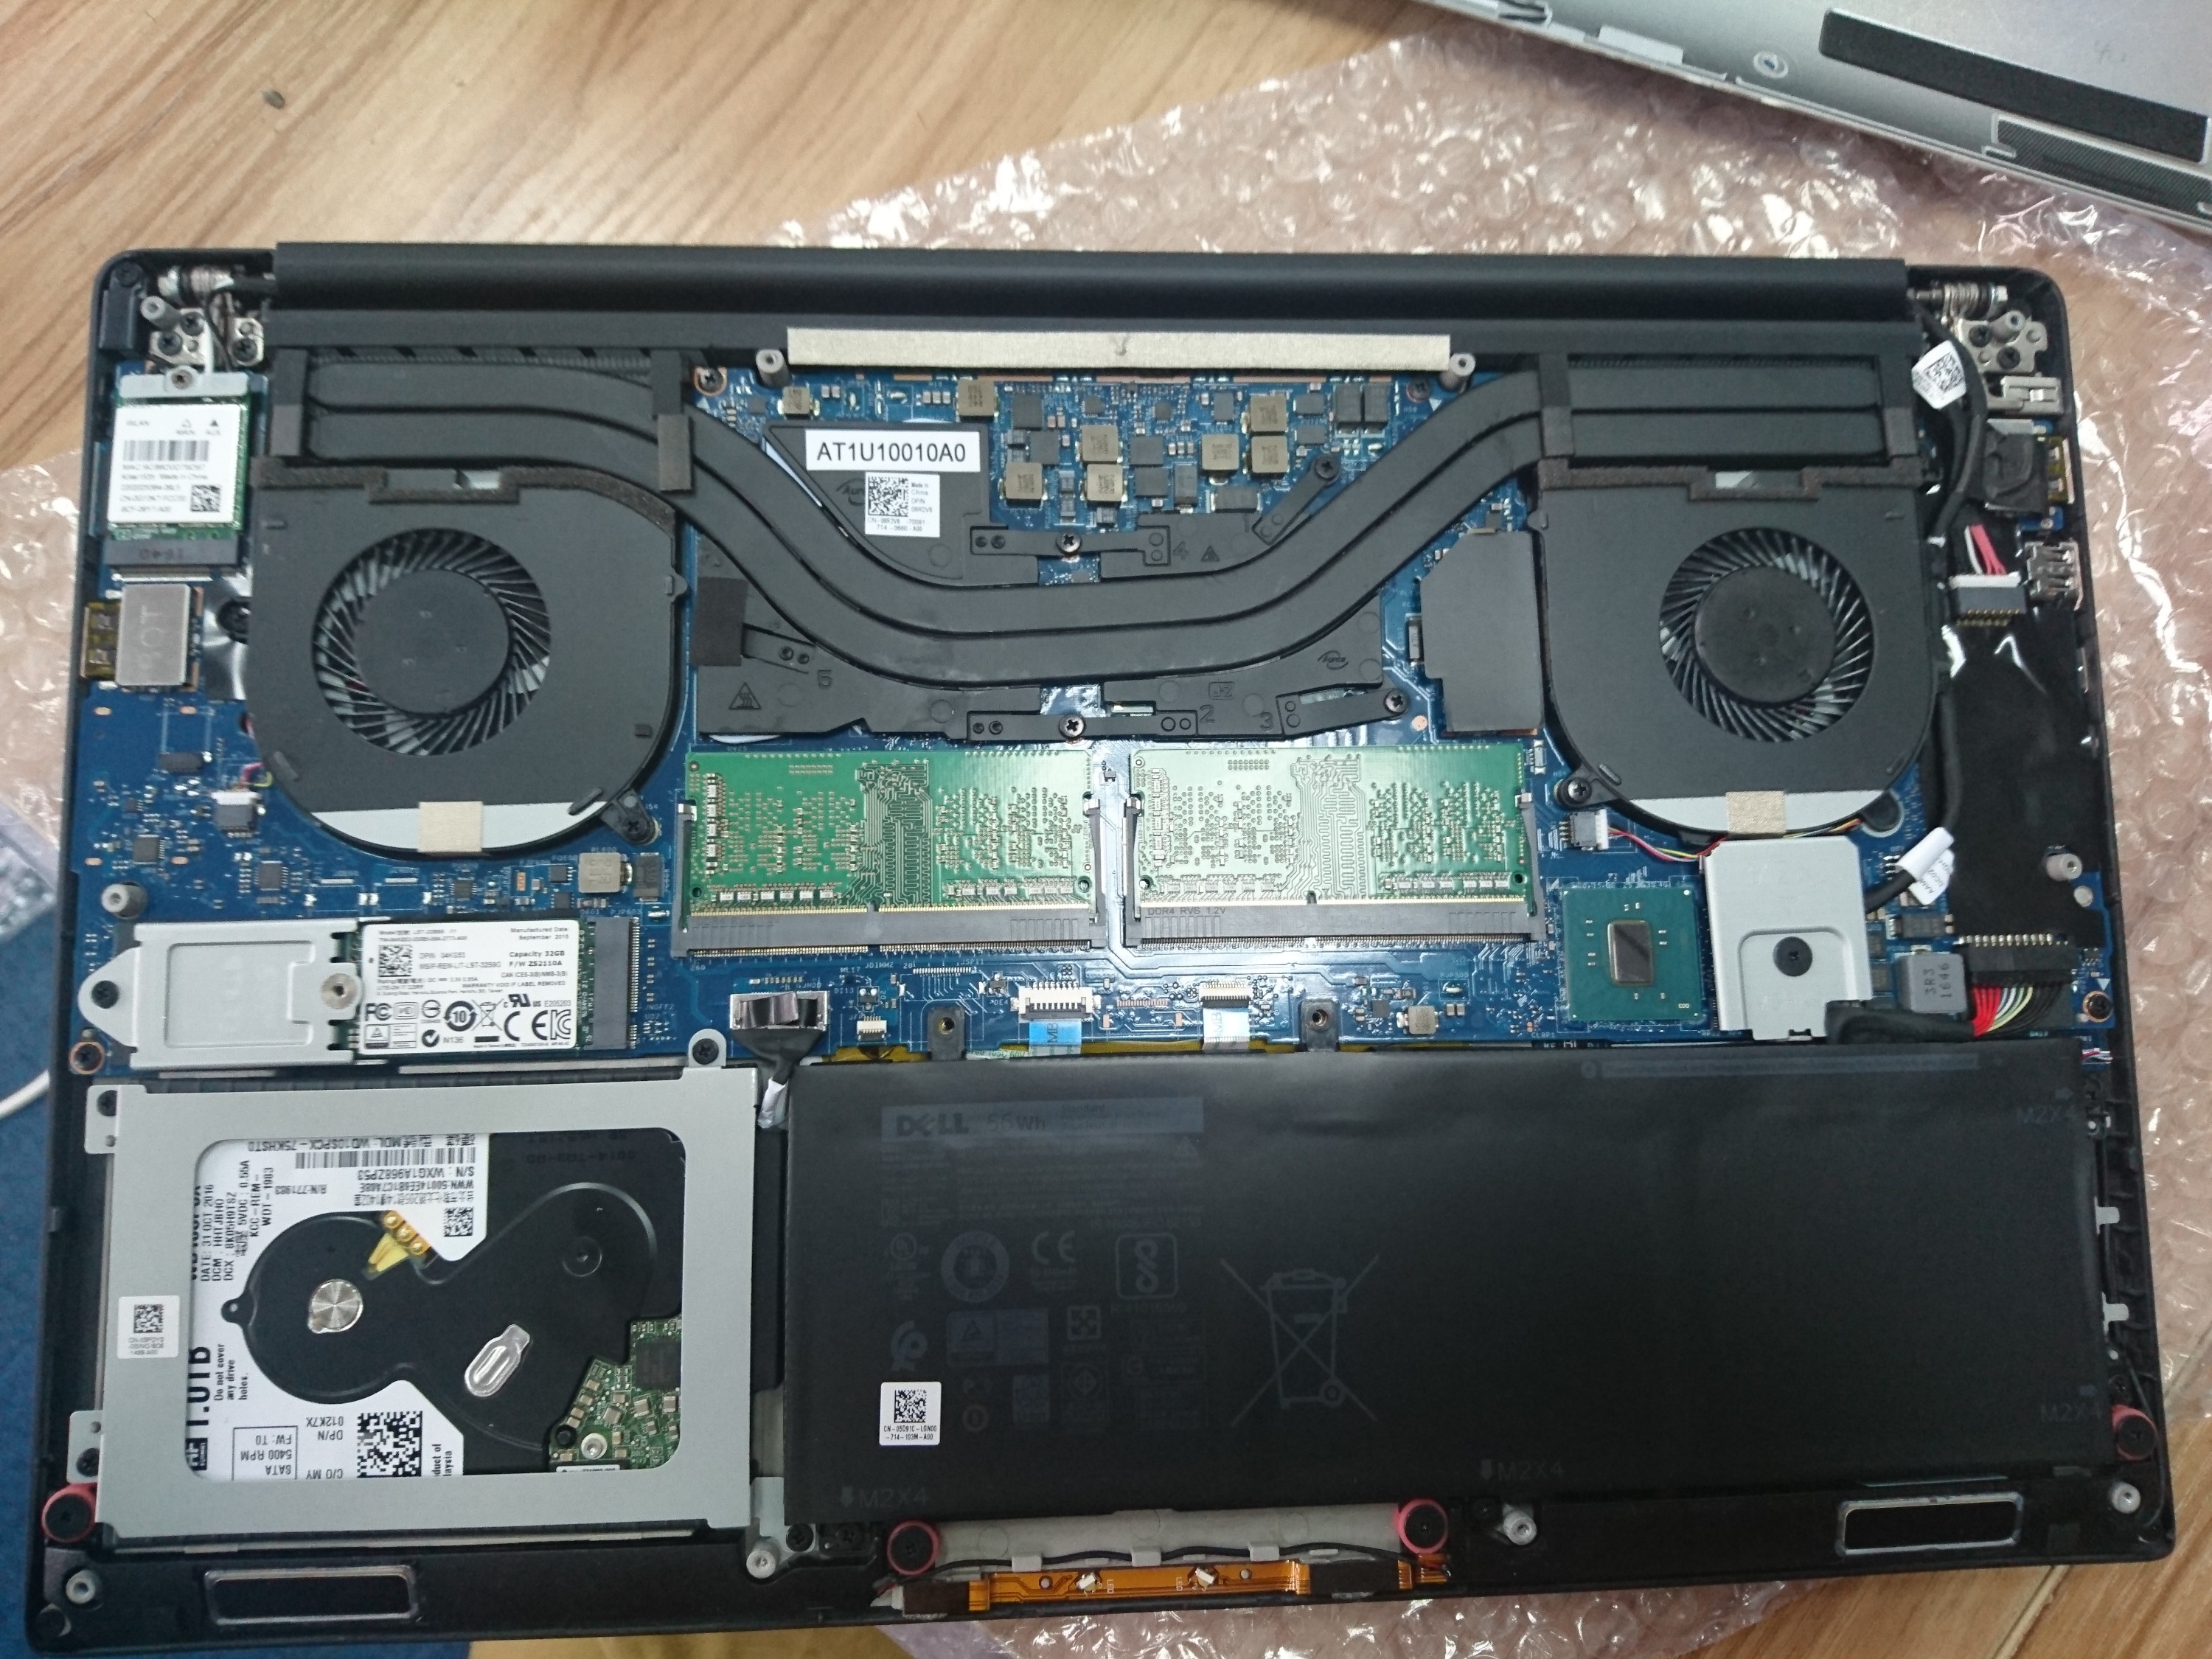 Dell XPS 15 9560 Disassembly (SSD, HDD, RAM Upgrade Options 